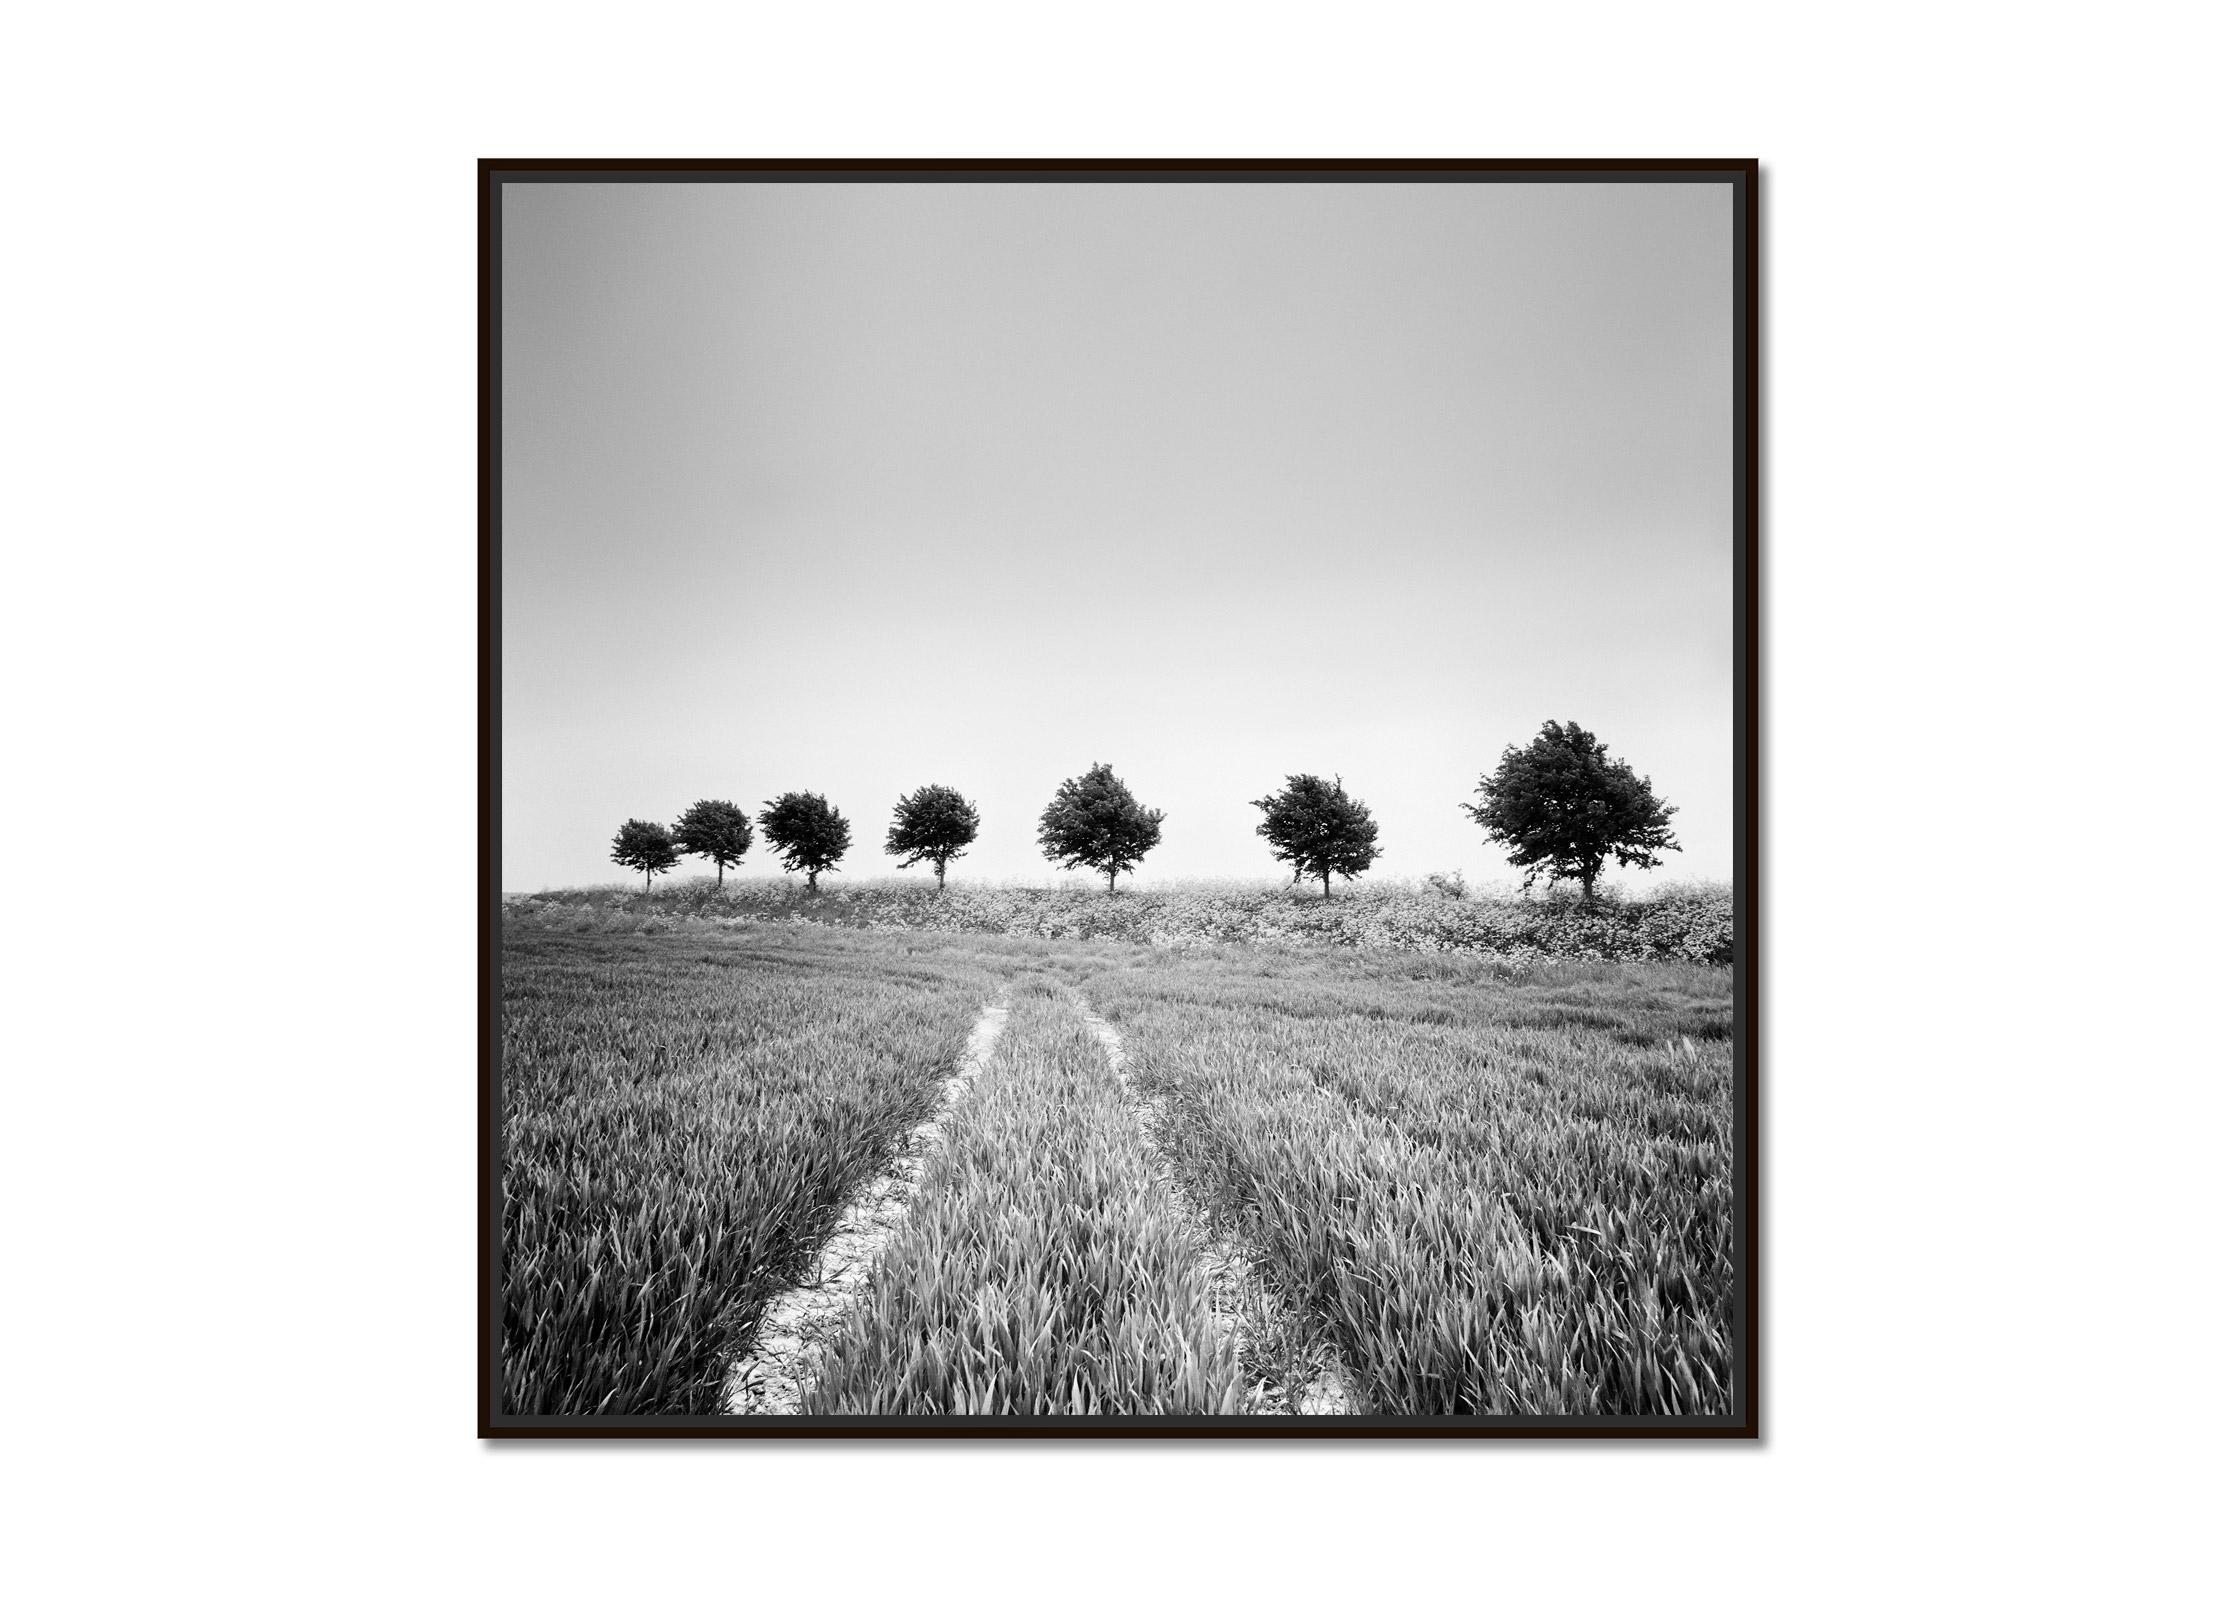 Wheat Field, Tree Avenue, Netherlands, black and white art landscape photography - Photograph by Gerald Berghammer